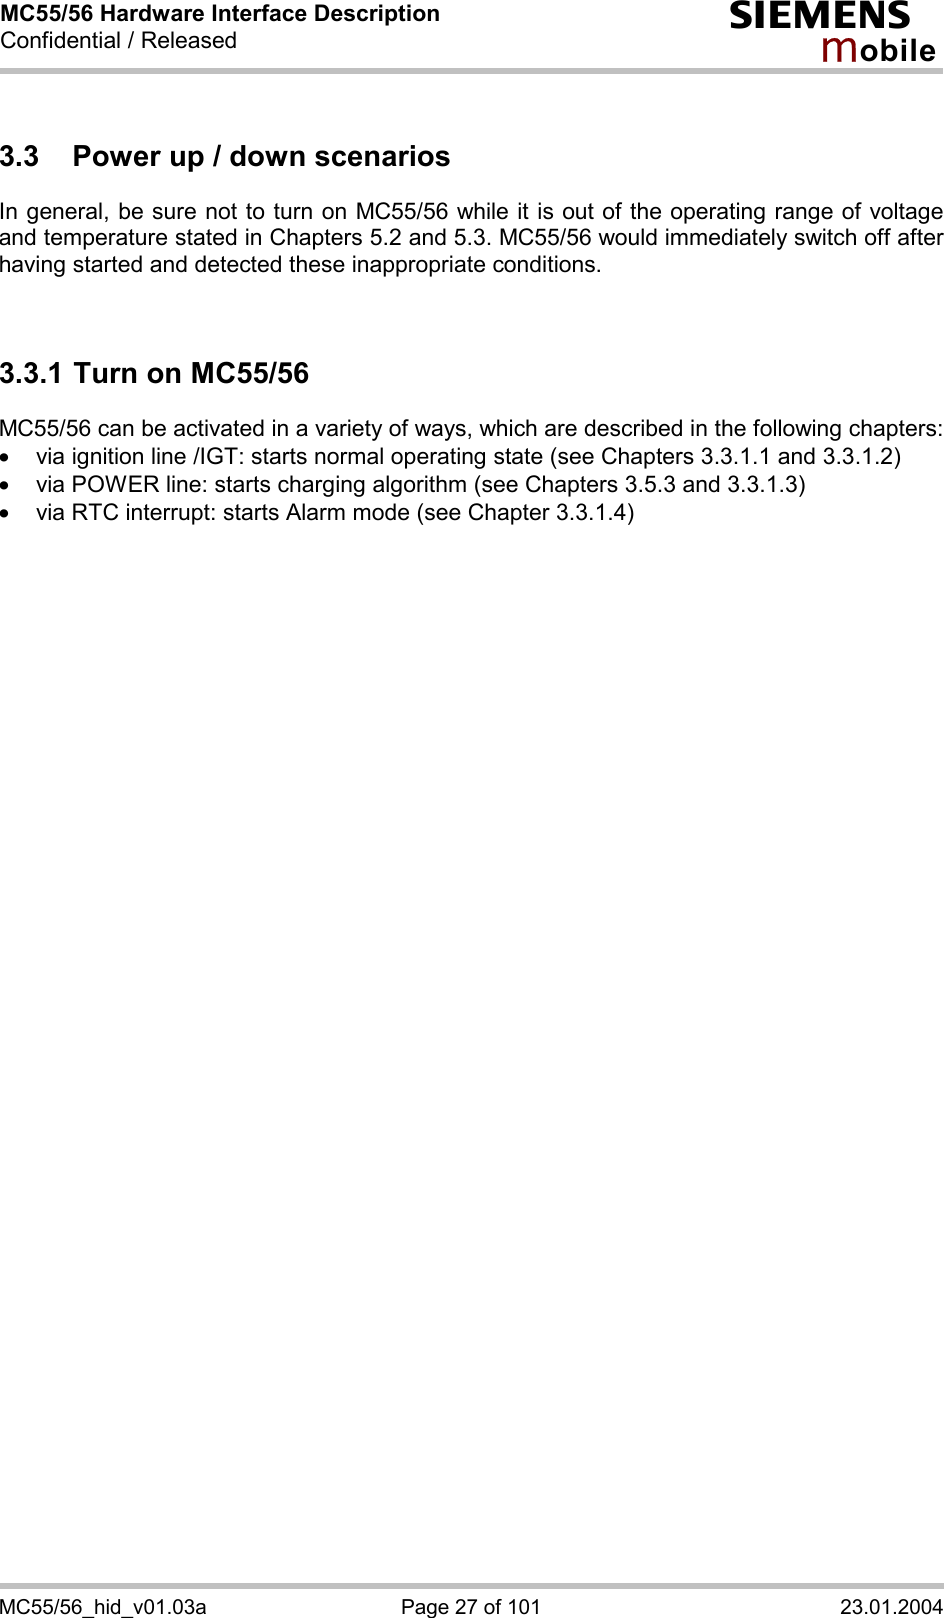 MC55/56 Hardware Interface Description Confidential / Released s mo b i l e MC55/56_hid_v01.03a  Page 27 of 101  23.01.2004 3.3  Power up / down scenarios In general, be sure not to turn on MC55/56 while it is out of the operating range of voltage and temperature stated in Chapters 5.2 and 5.3. MC55/56 would immediately switch off after having started and detected these inappropriate conditions.   3.3.1 Turn on MC55/56 MC55/56 can be activated in a variety of ways, which are described in the following chapters: ·  via ignition line /IGT: starts normal operating state (see Chapters 3.3.1.1 and 3.3.1.2) ·  via POWER line: starts charging algorithm (see Chapters 3.5.3 and 3.3.1.3) ·  via RTC interrupt: starts Alarm mode (see Chapter 3.3.1.4)  